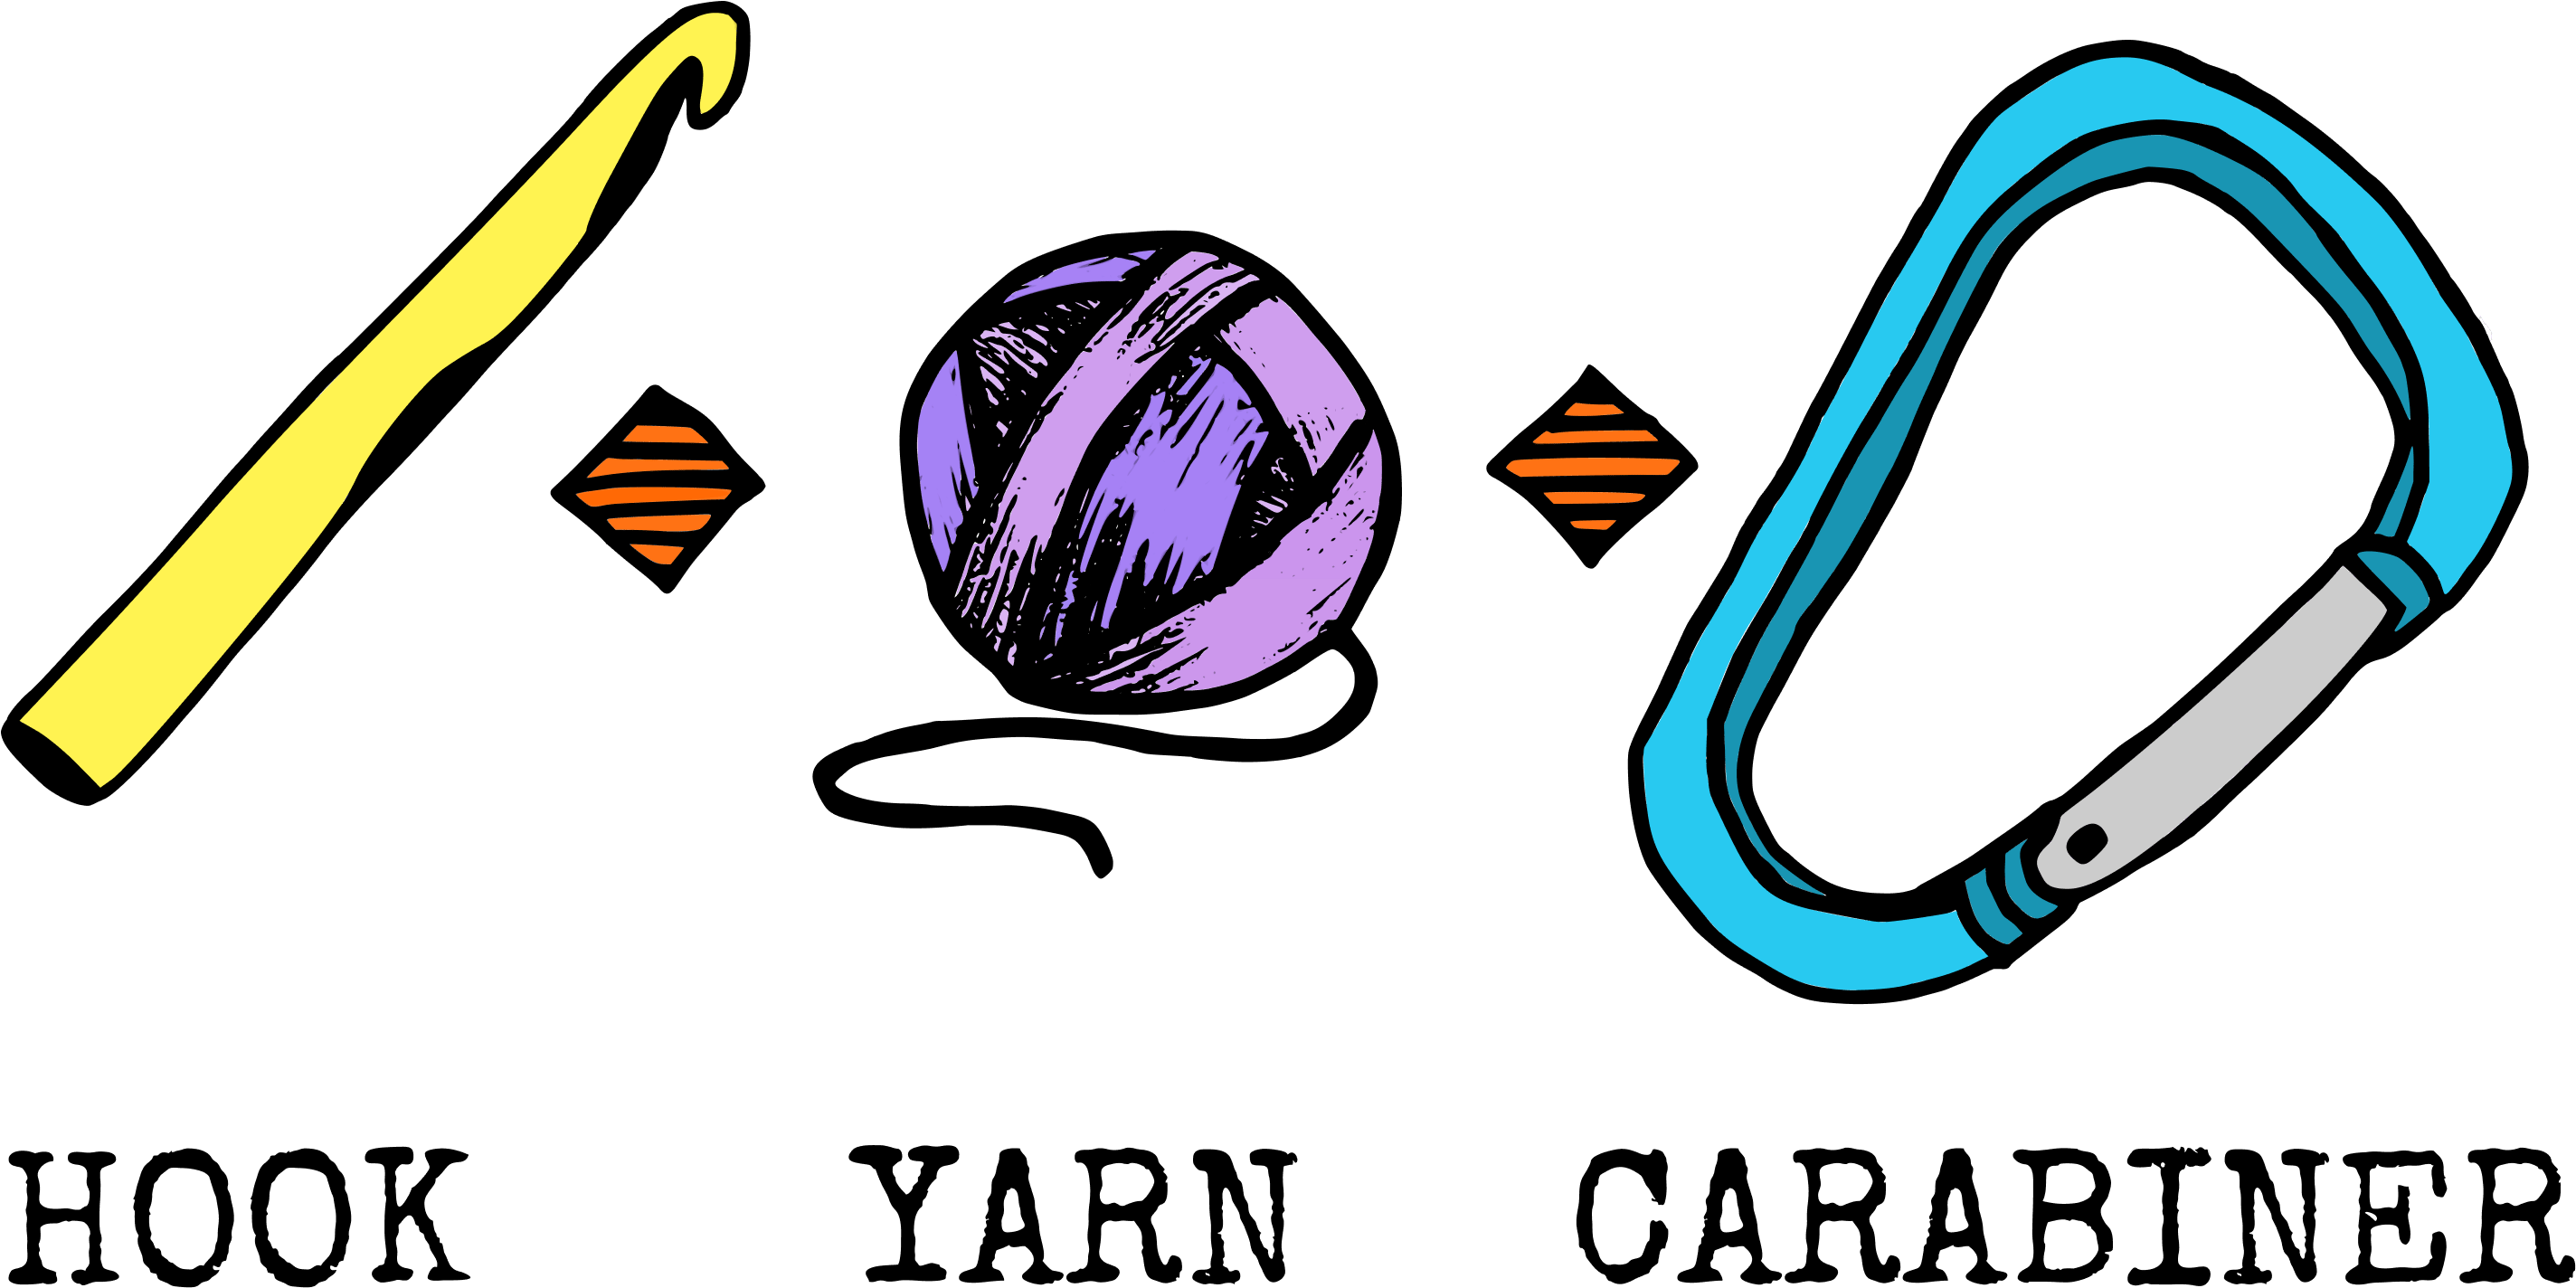 A Graphic Of A Yellow Crochet Hook, A Purple Ball Of - A Graphic Of A Yellow Crochet Hook, A Purple Ball Of (3600x1800)